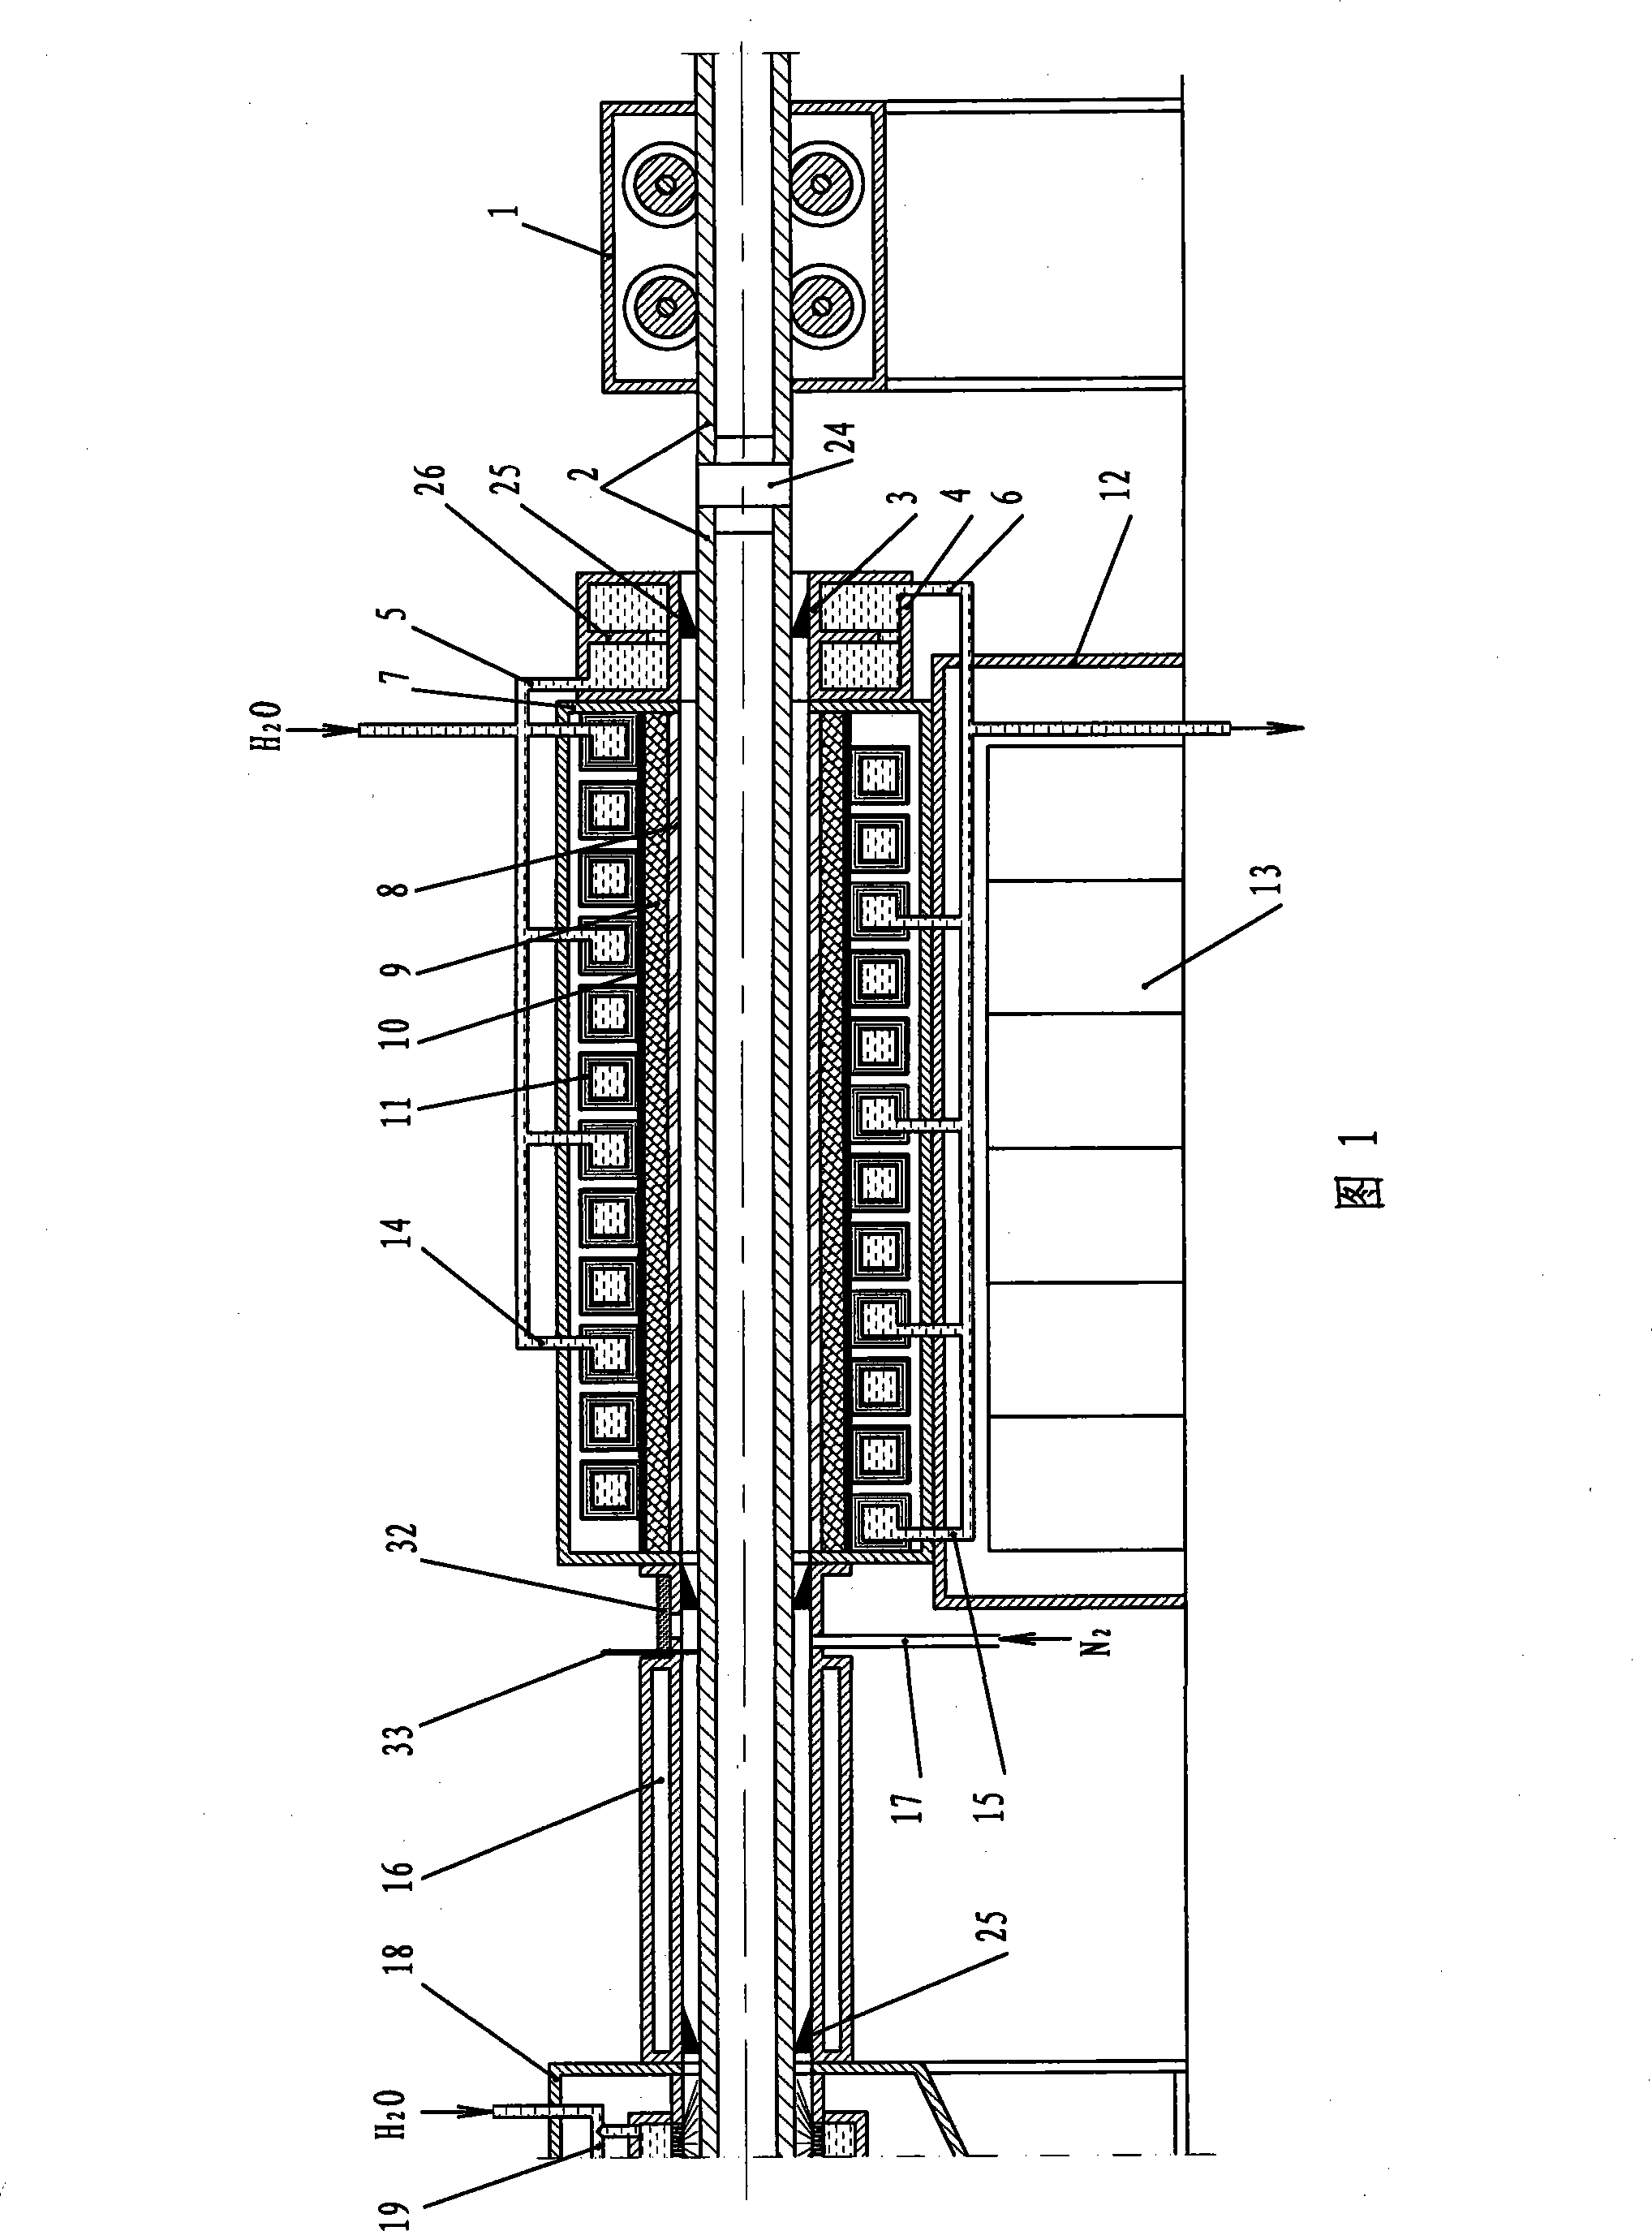 On-line annealing method and apparatus for rolling copper pipe